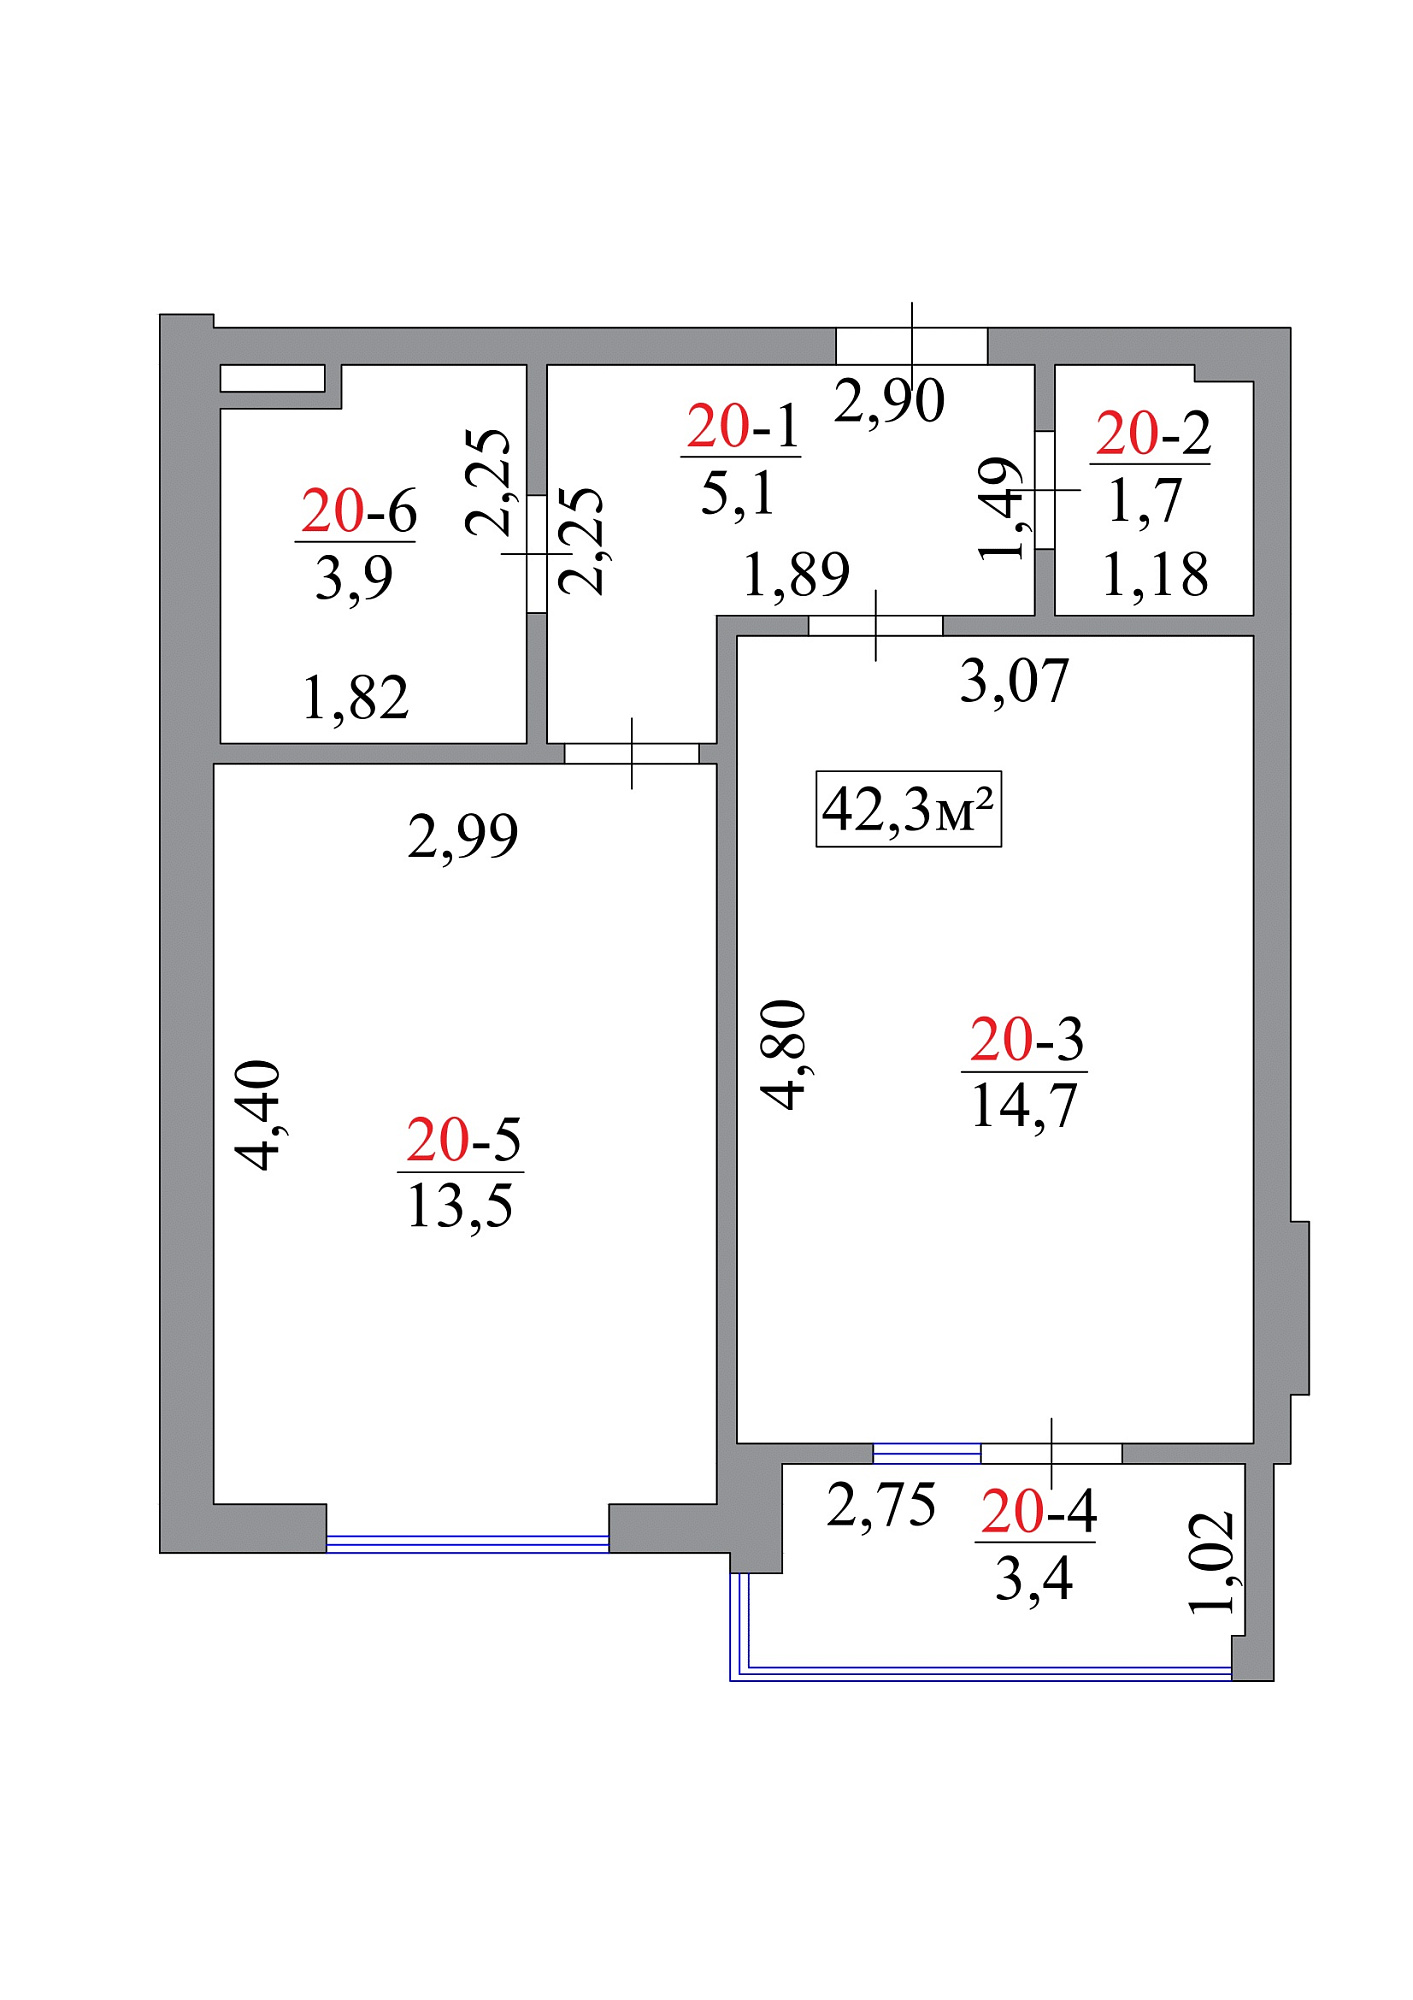 Planning 1-rm flats area 42.3m2, AB-07-02/00018.